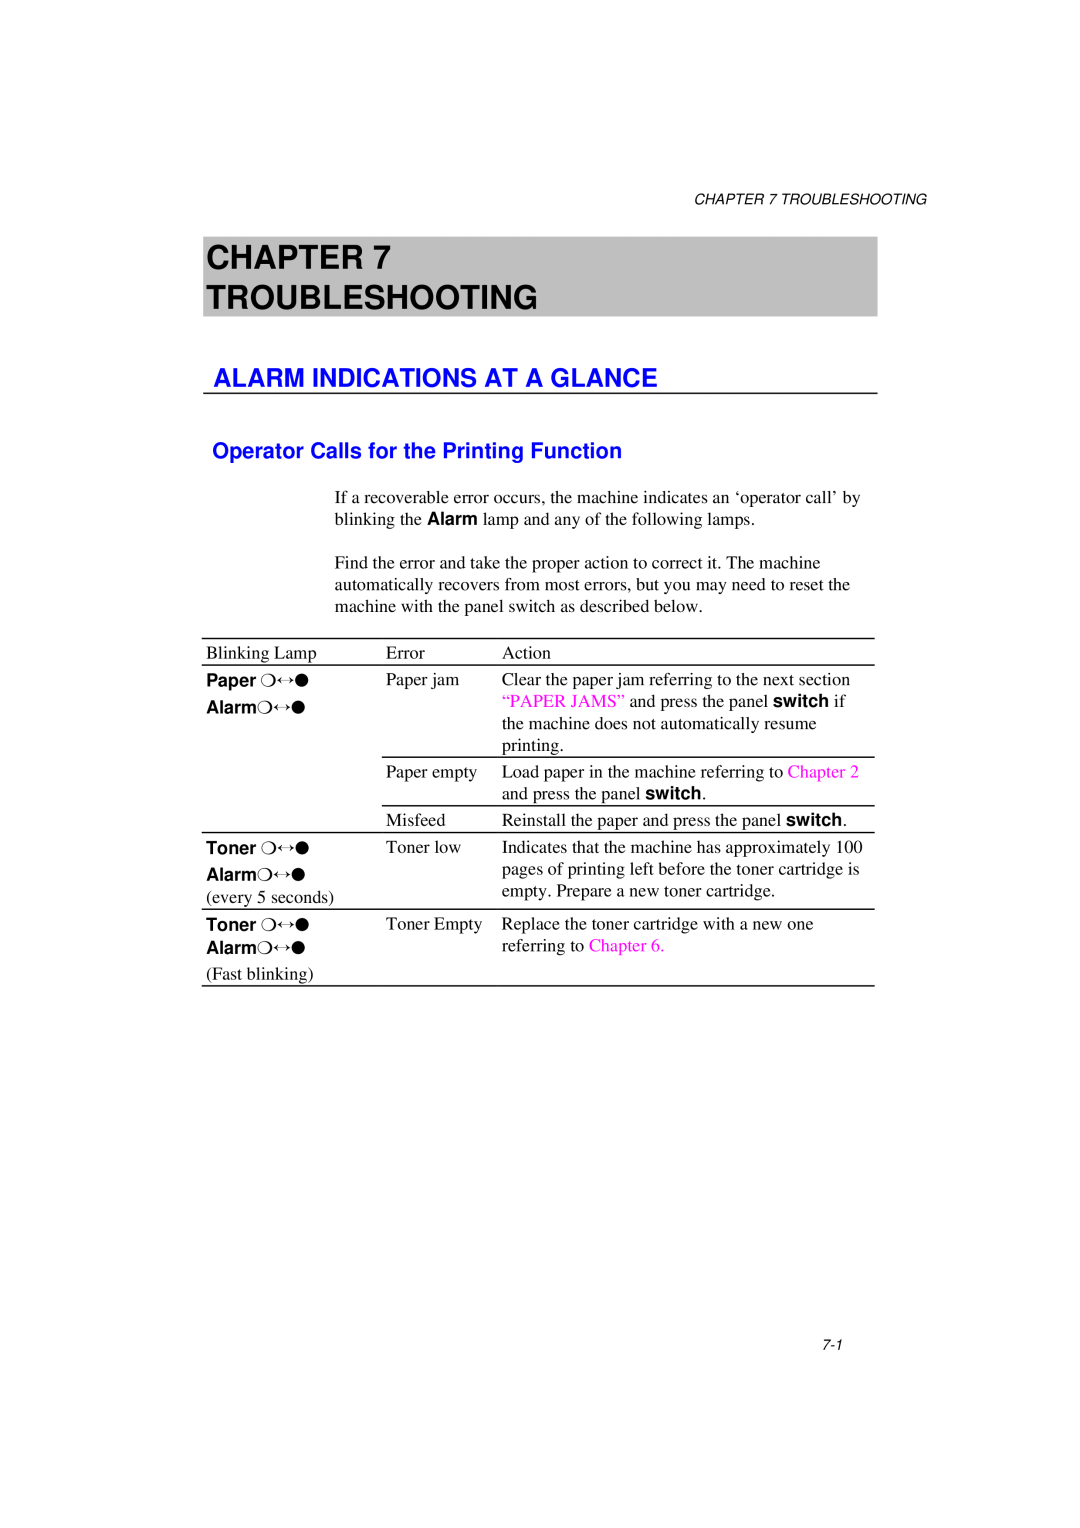 Brother MFC/HL-P2000 Chapter Troubleshooting, Alarm Indications At A Glance, Operator Calls for the Printing Function 